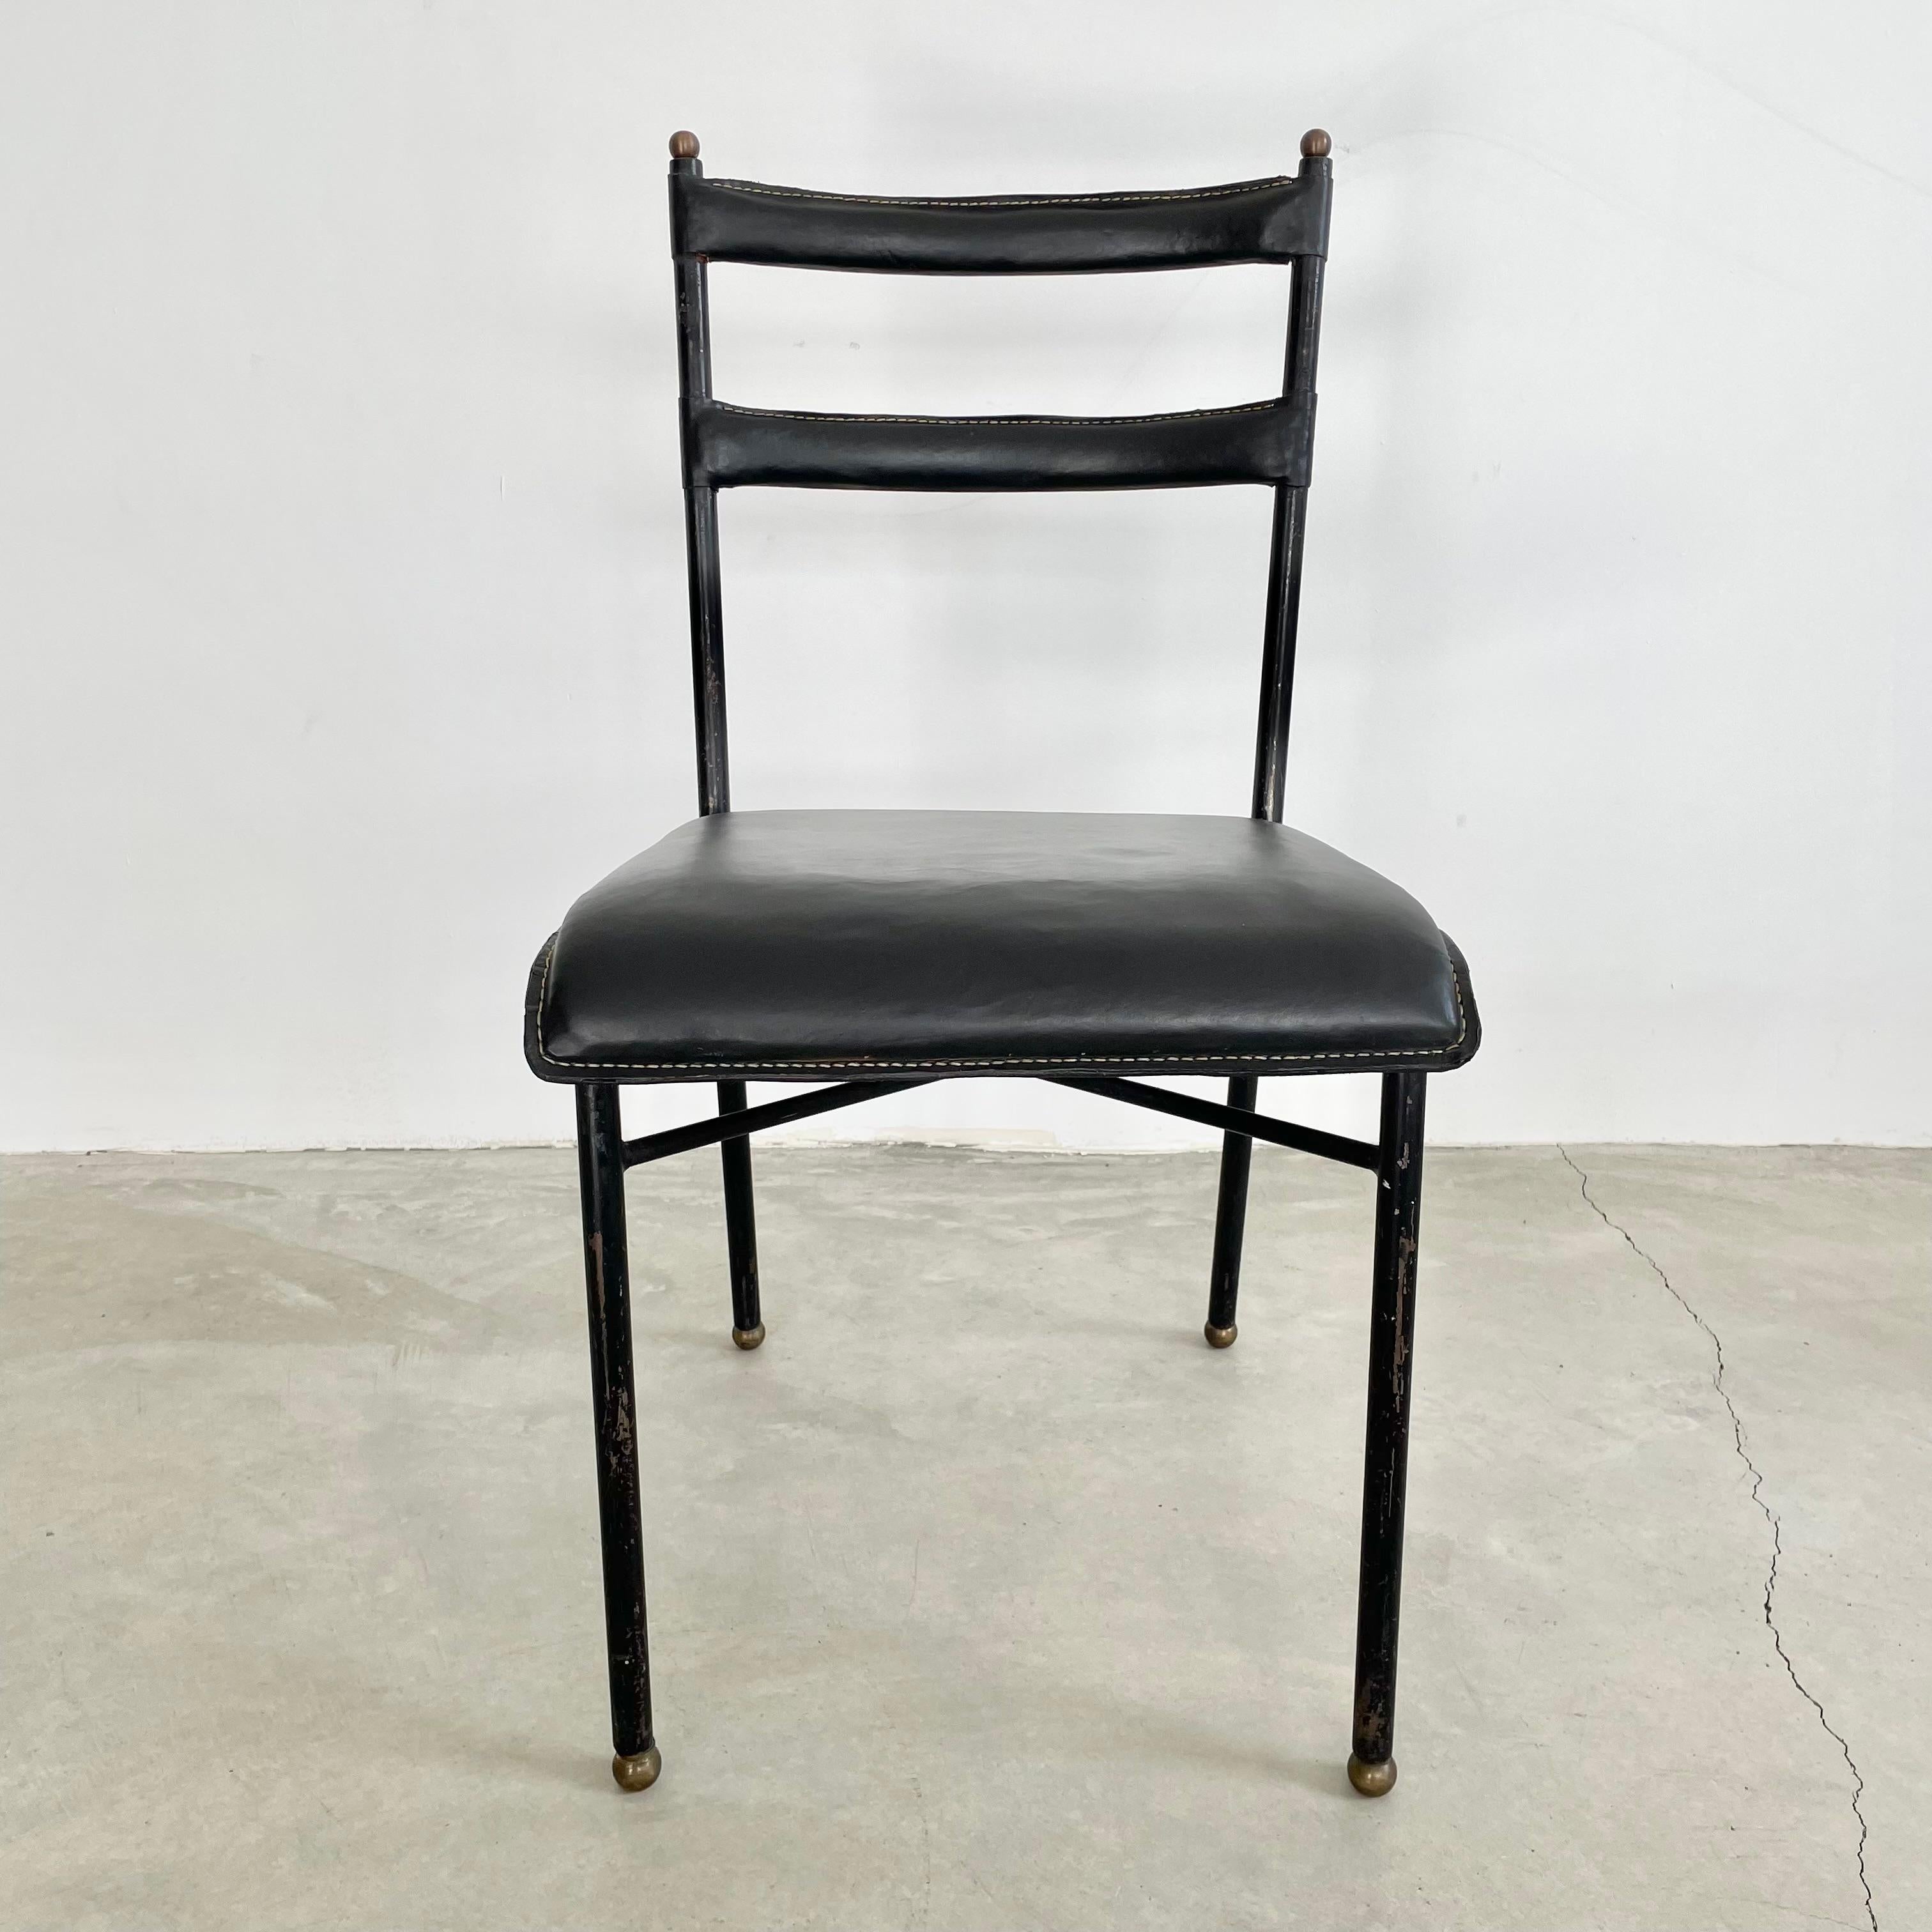 Stunning black leather chair by French designer Jacques Adnet. Black metal frame with its legs ending in brass ball feet. Brass balls adorn the top of the frame as well. Thick leather seat and backrests hand-stitched in the characteristic Adnet